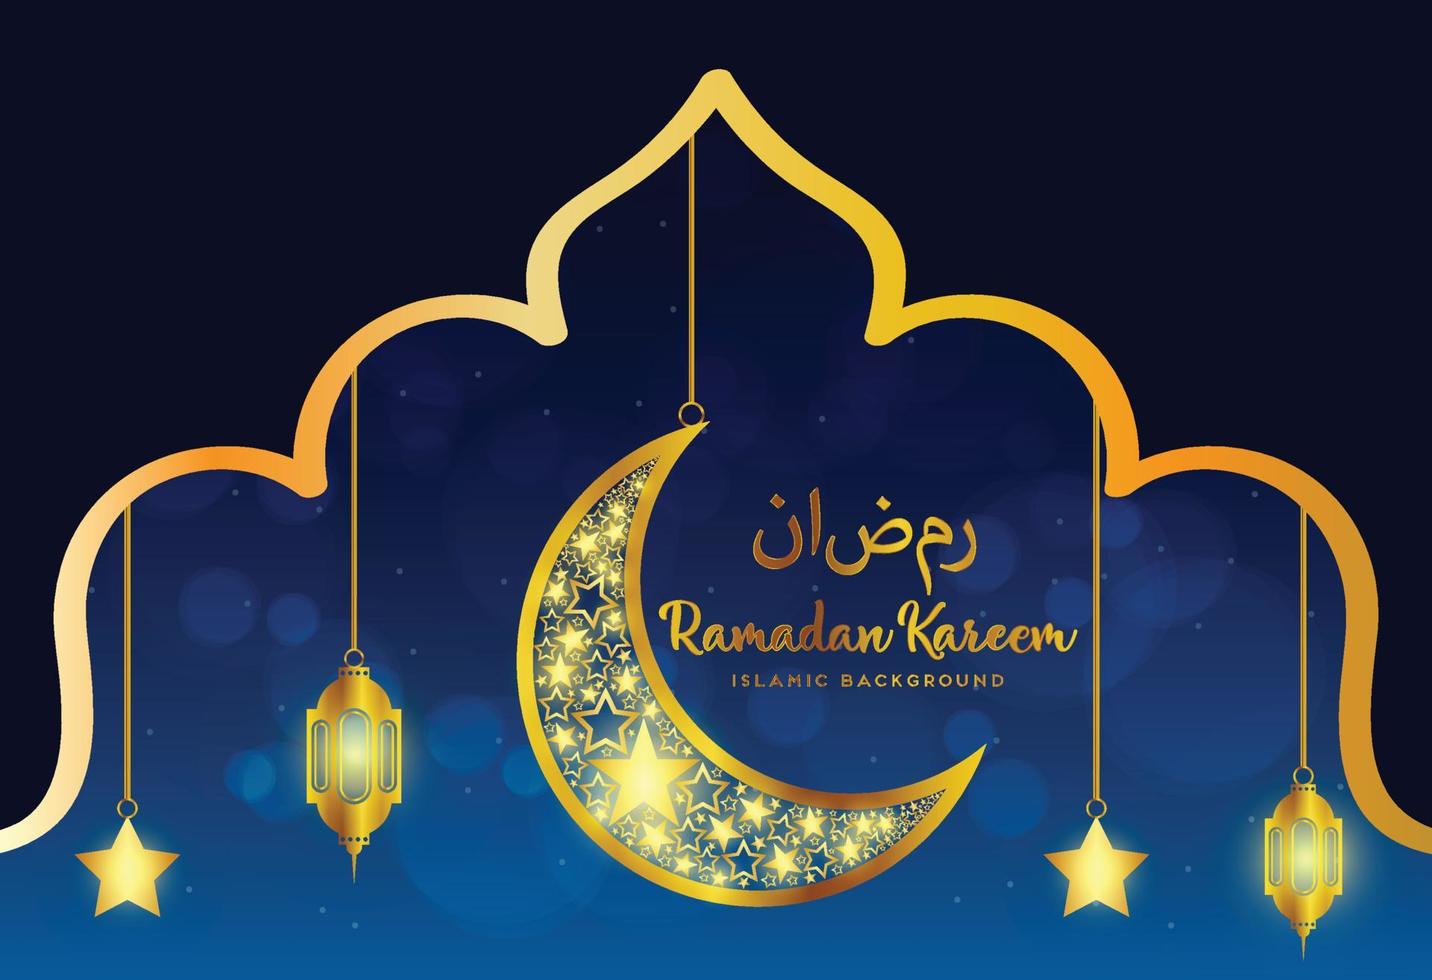 Ramadan kareem background, illustration with arabic lanterns and golden ornate crescent, on starry background with clouds. EPS 10 contains transparency. vector